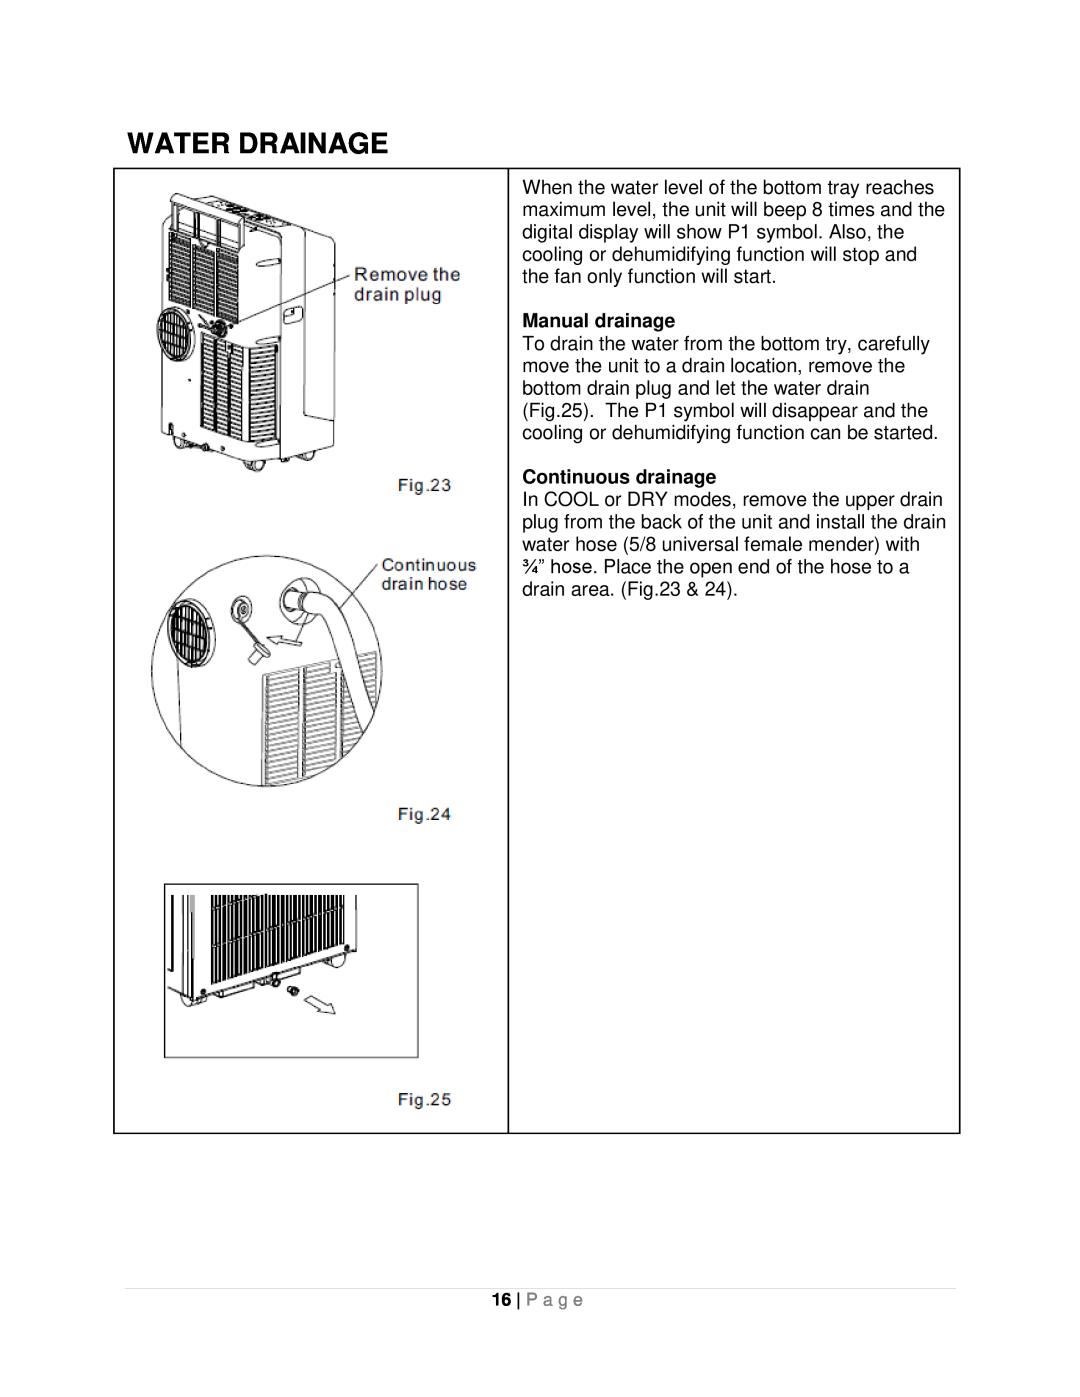 Whynter ARC-10WB instruction manual Water Drainage, Manual drainage, Continuous drainage 